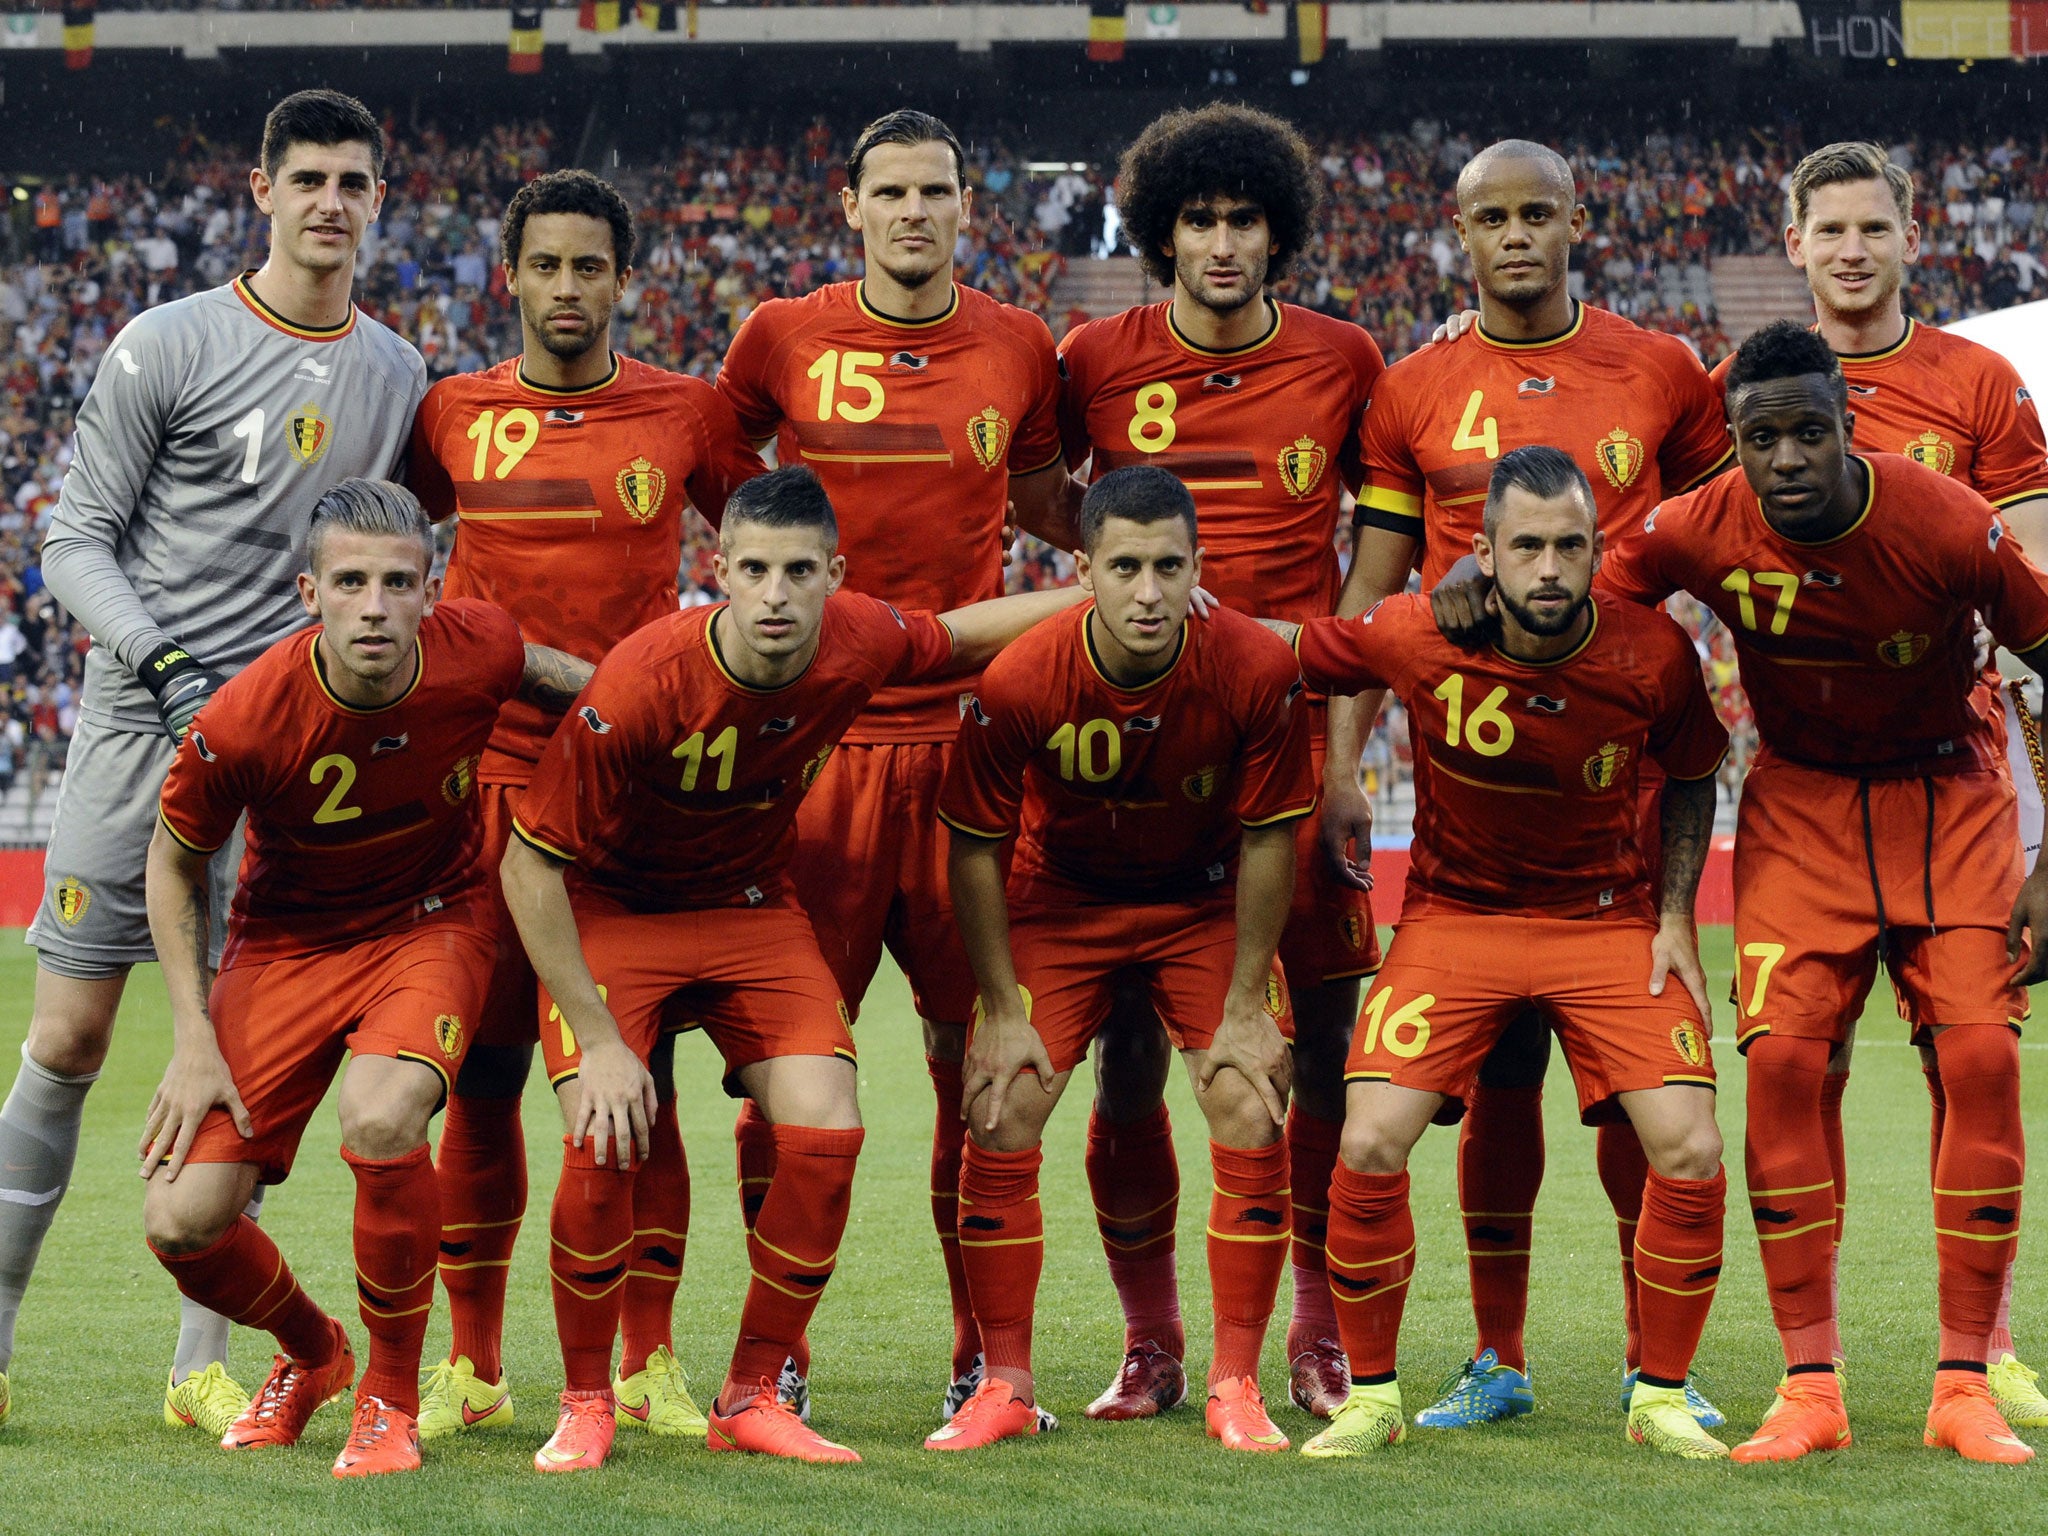 It's time to deliver for the talented Belgium team